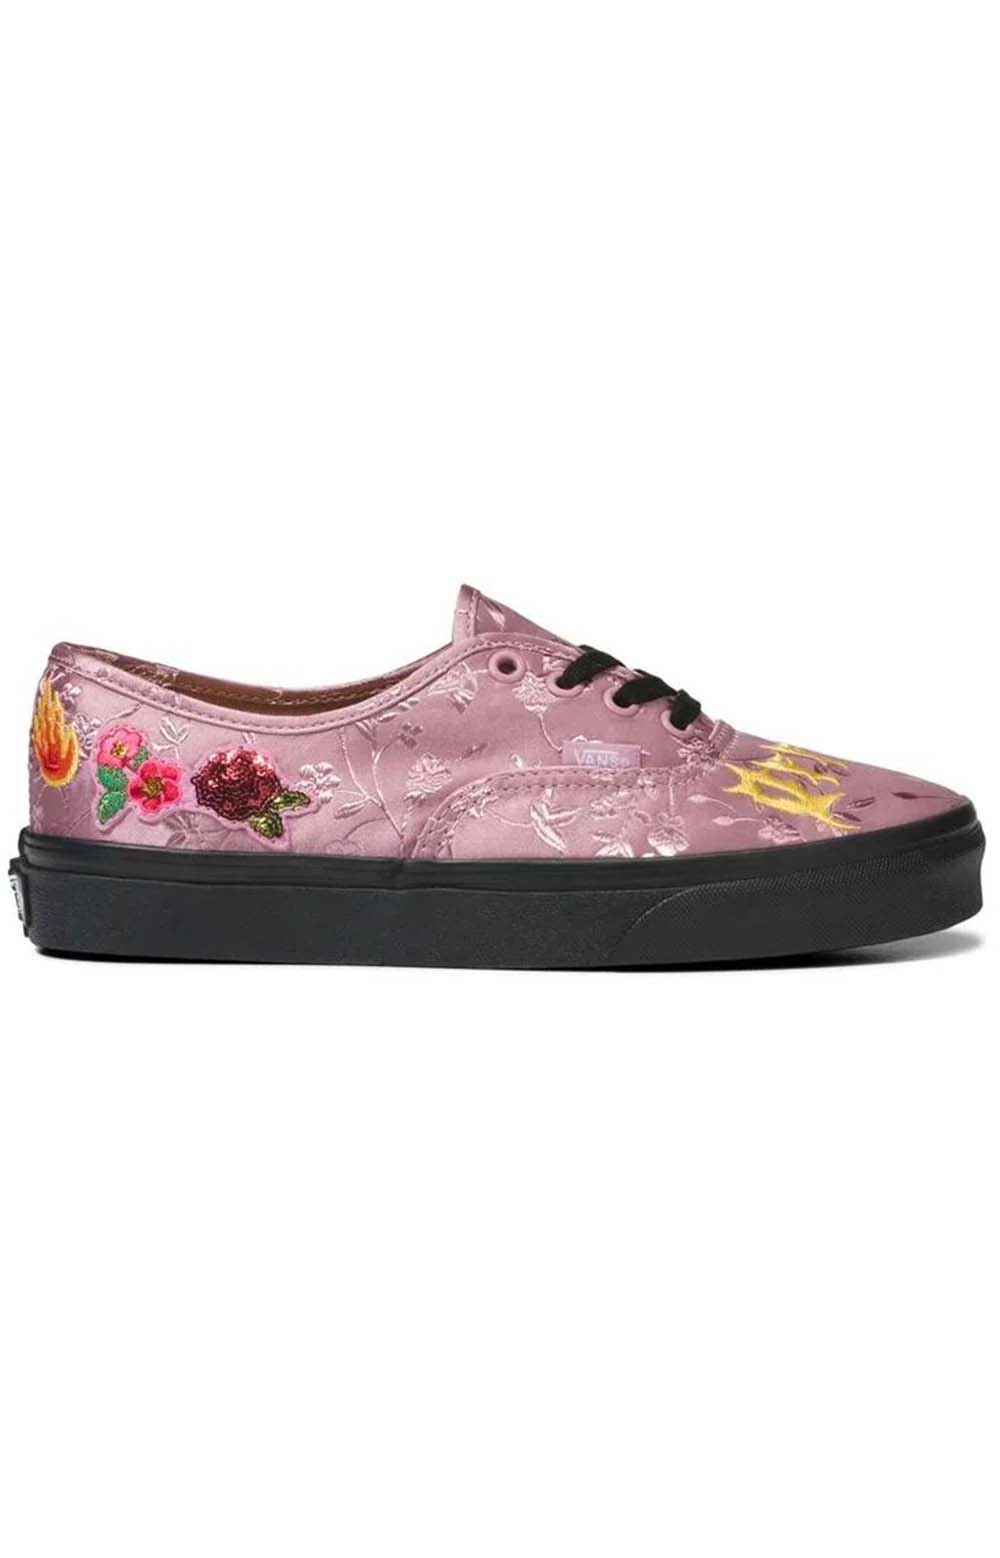 (JMPPIB) Moody Crafts Authentic Shoes - Pink/Black